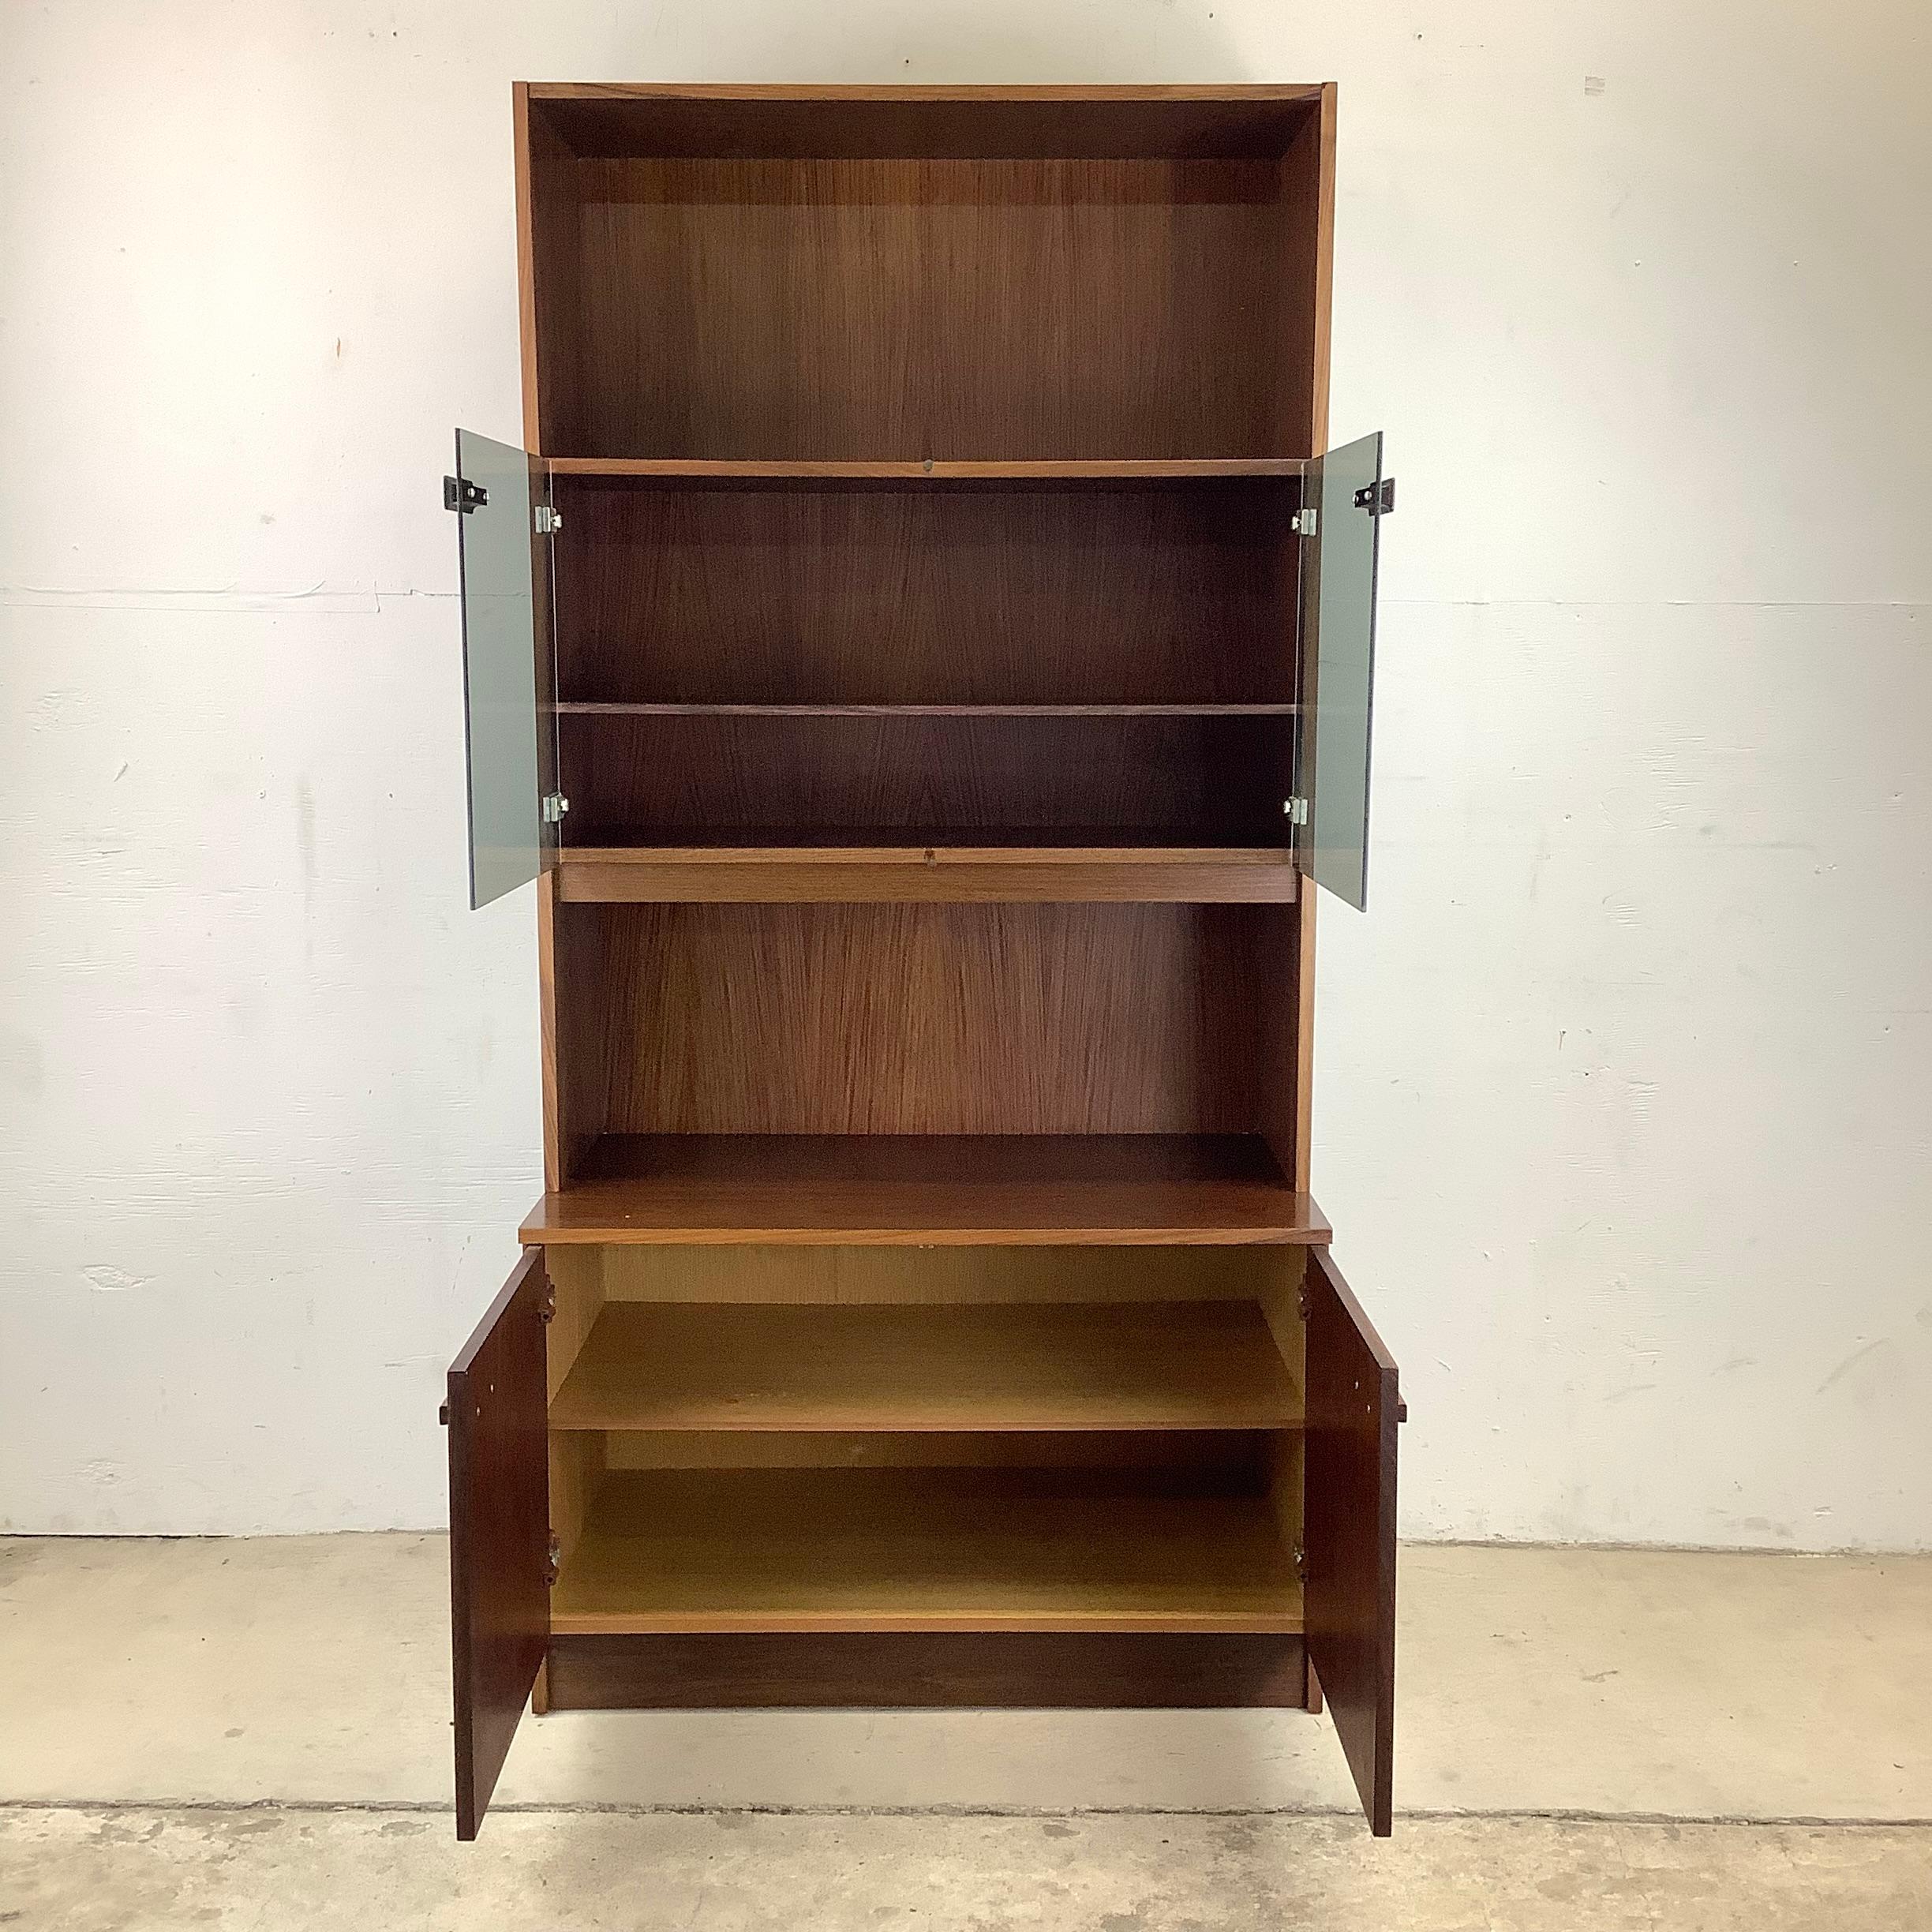 This stylish Scandinavian Modern rosewood bookshelf with smoked glass cabinet and lower storage cupboard makes a unique addition to any interior. The perfect Size for a space saving bar cabinet or for a mixture of display and storage in home or